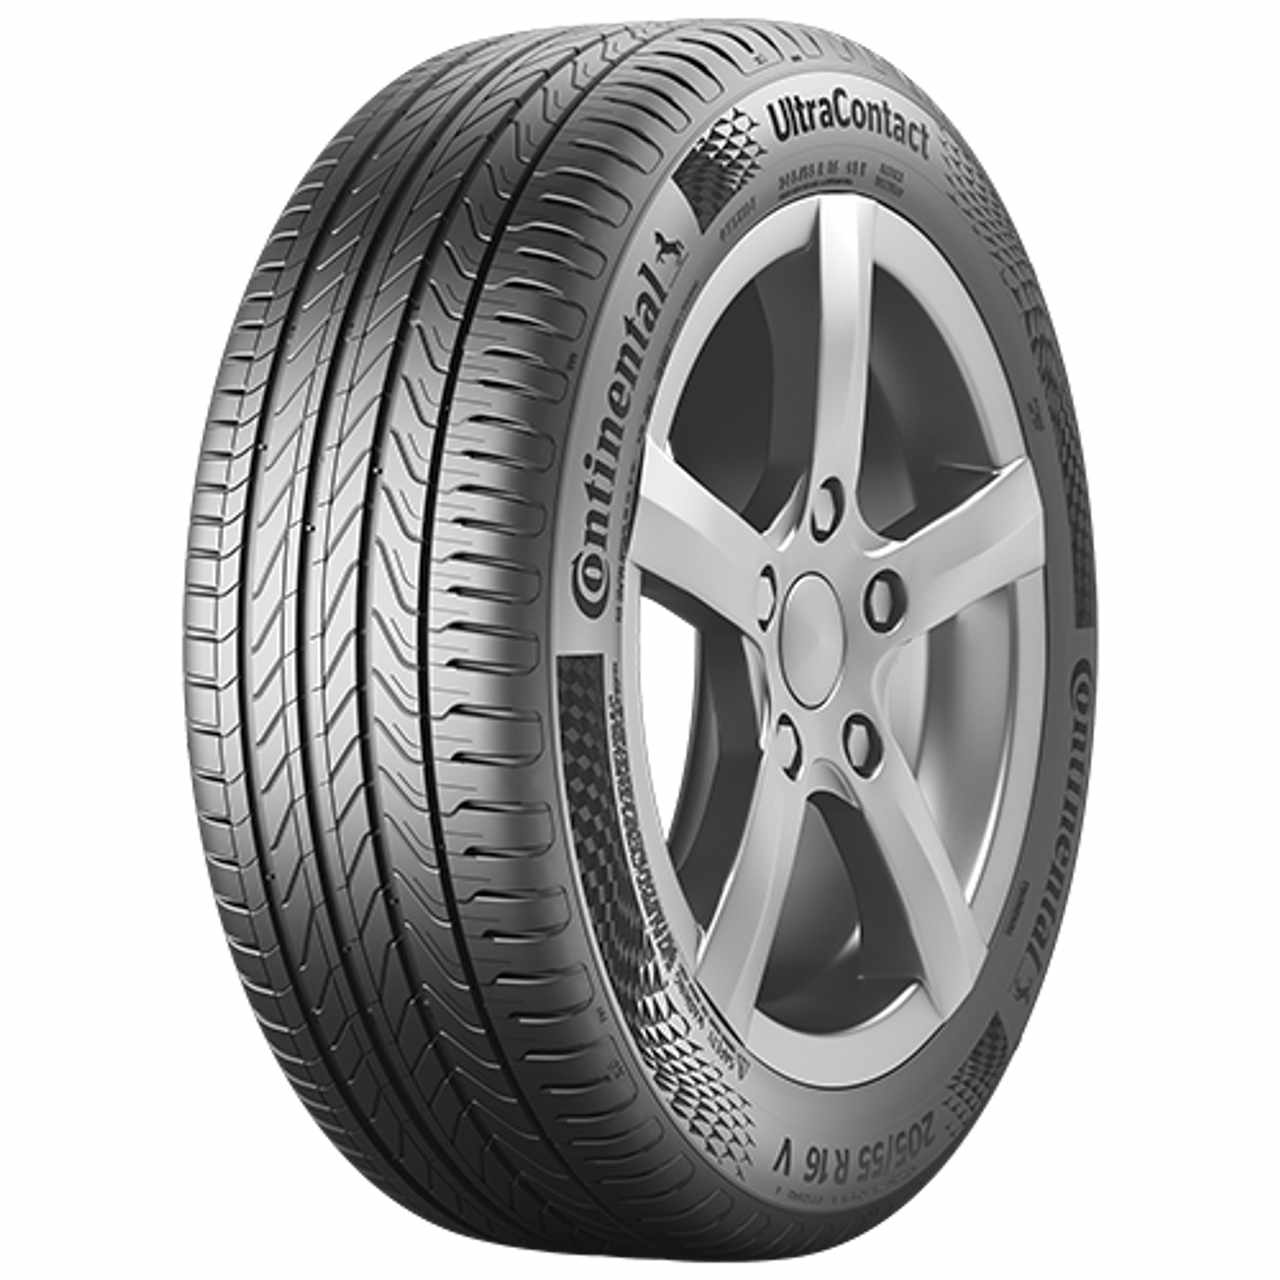 CONTINENTAL ULTRACONTACT (EVc) 165/70R14 81T BSW